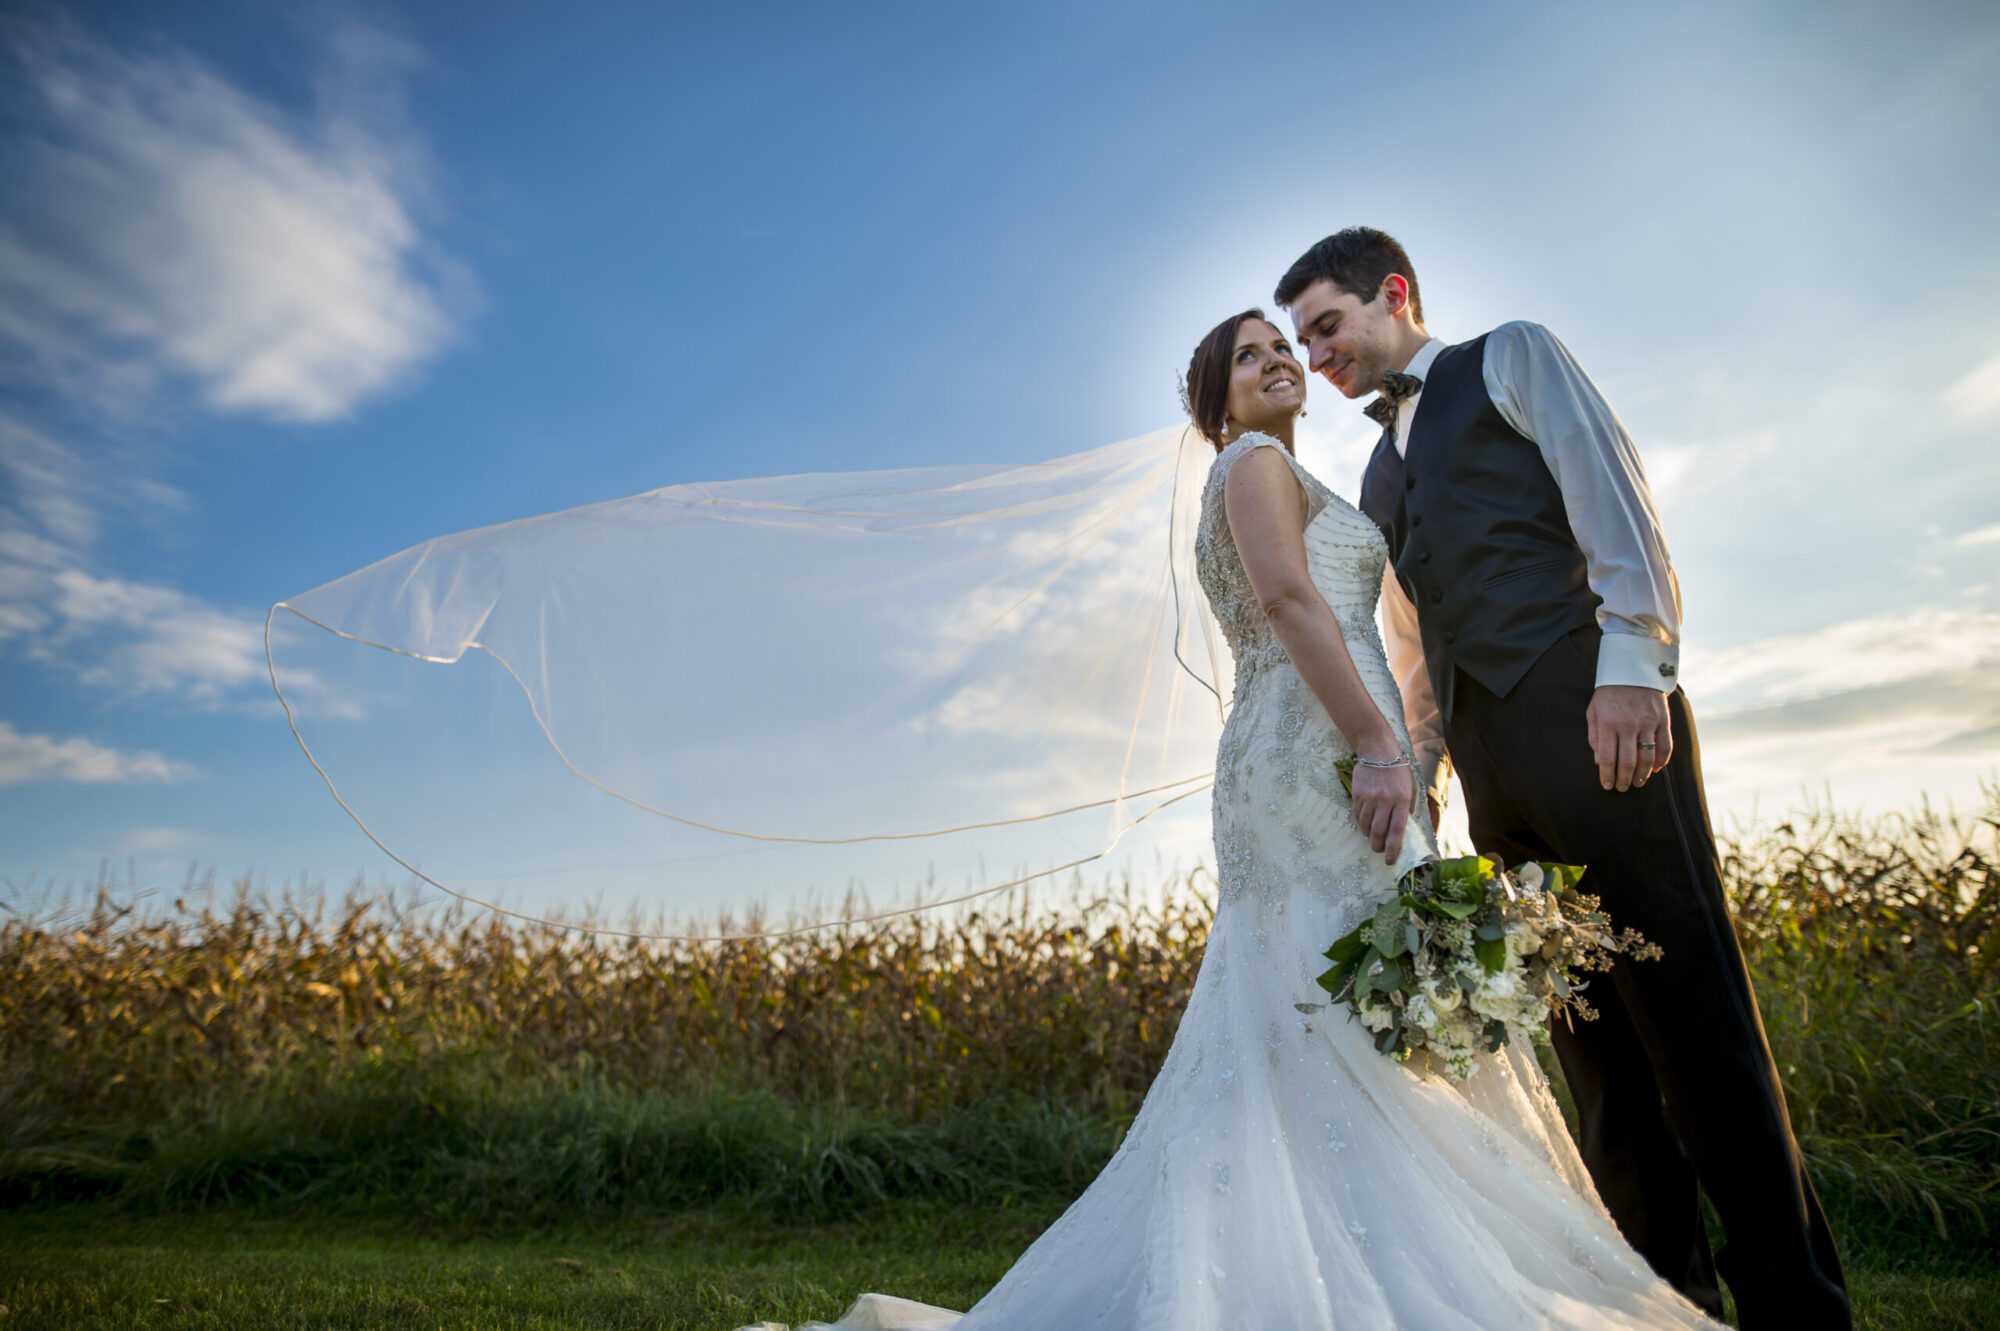 A bride and groom posing together on their wedding day in front of a corn field. The bride's vail hangs in the air behind her. Family and wedding photography in Pittsburgh.